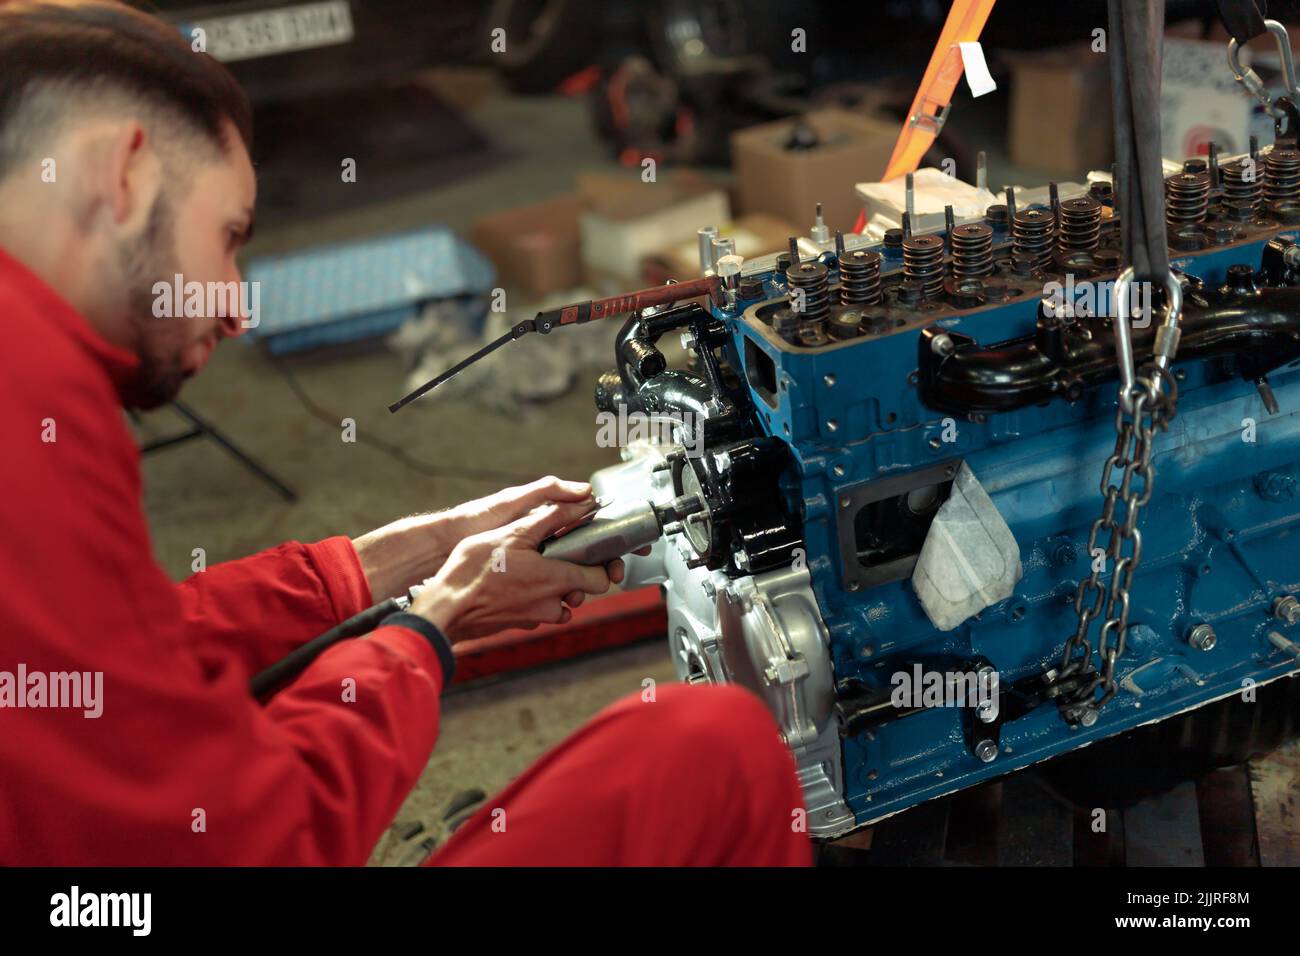 A young Caucasian mechanic mounting the car engine Stock Photo